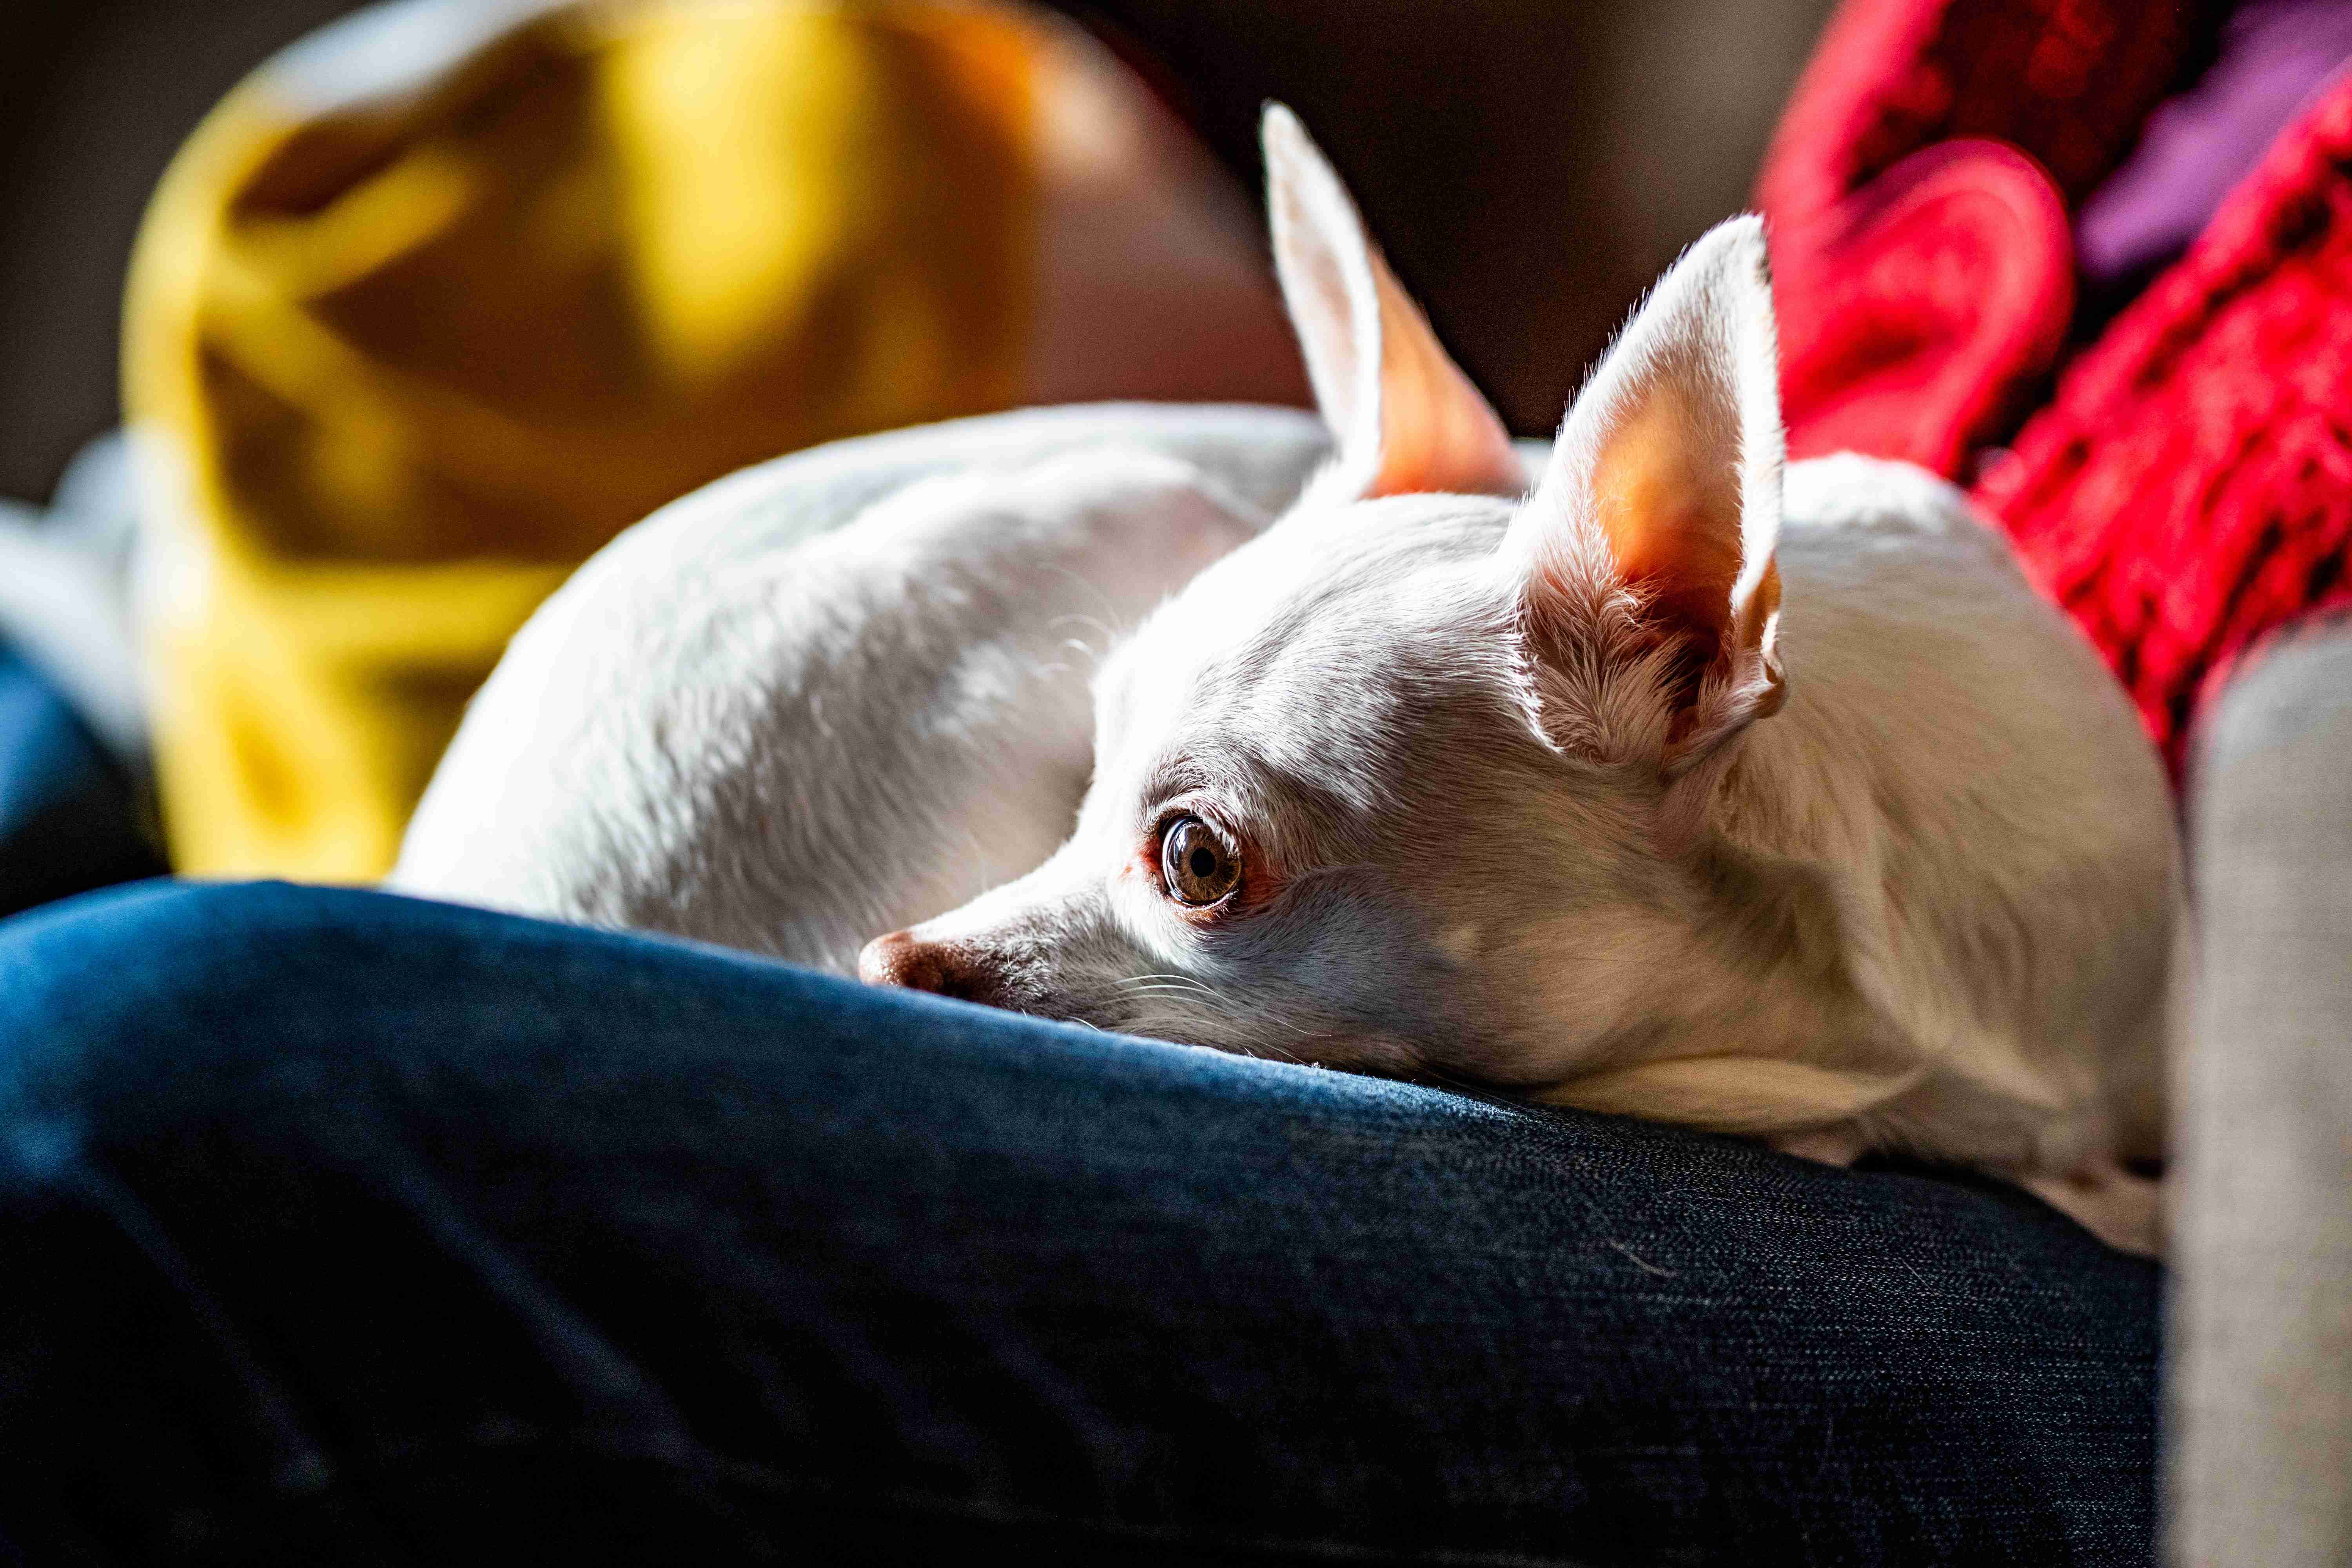 How can you teach children or other family members to interact appropriately with a Chihuahua with anger issues?